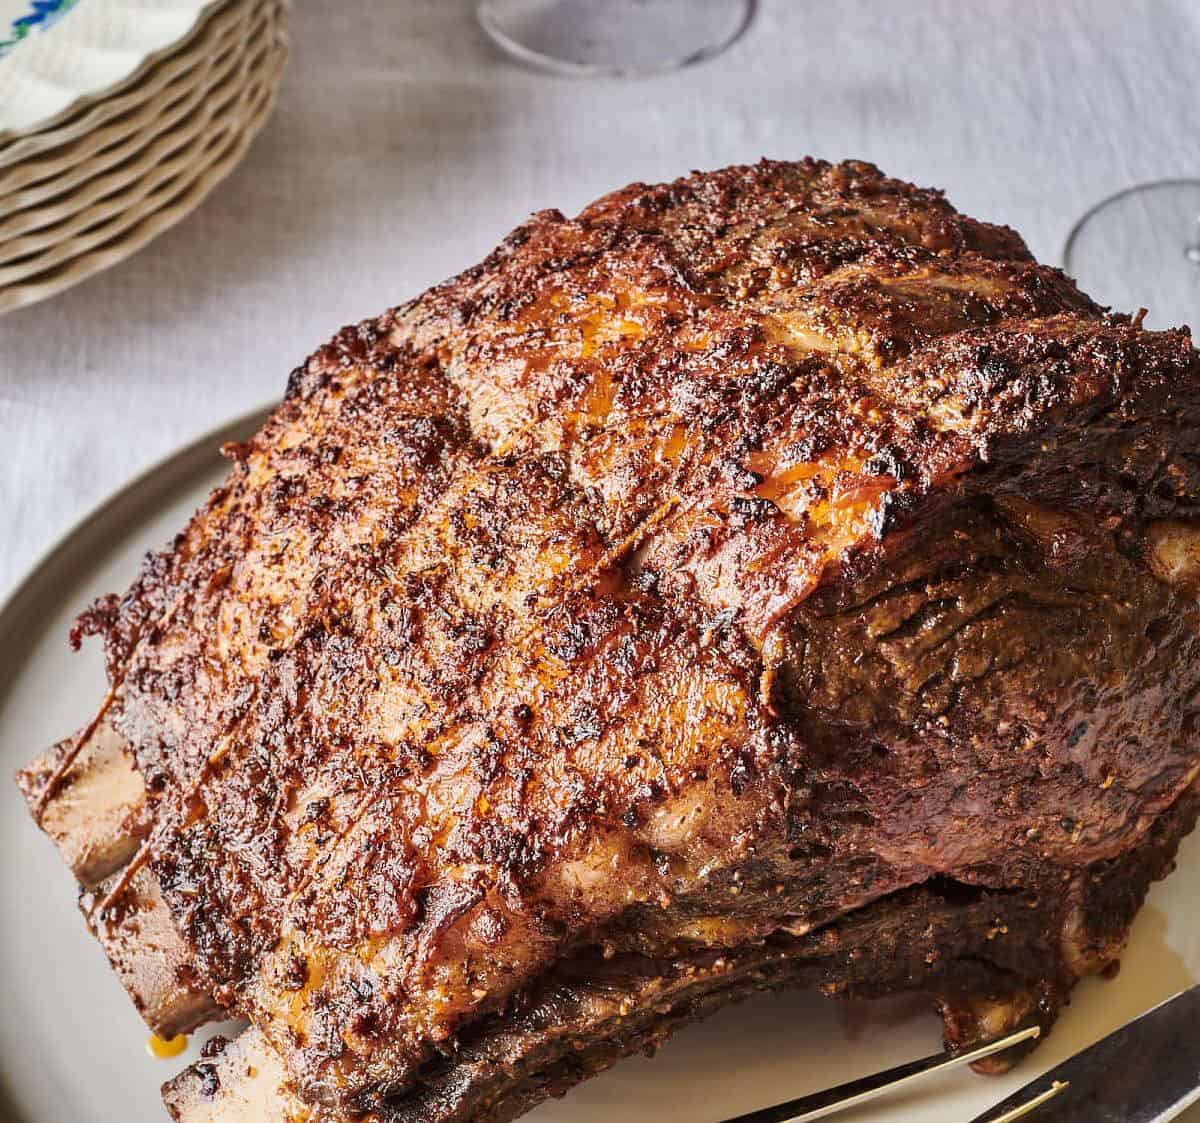  The ultimate centerpiece for a festive dinner party: a standing rib roast.